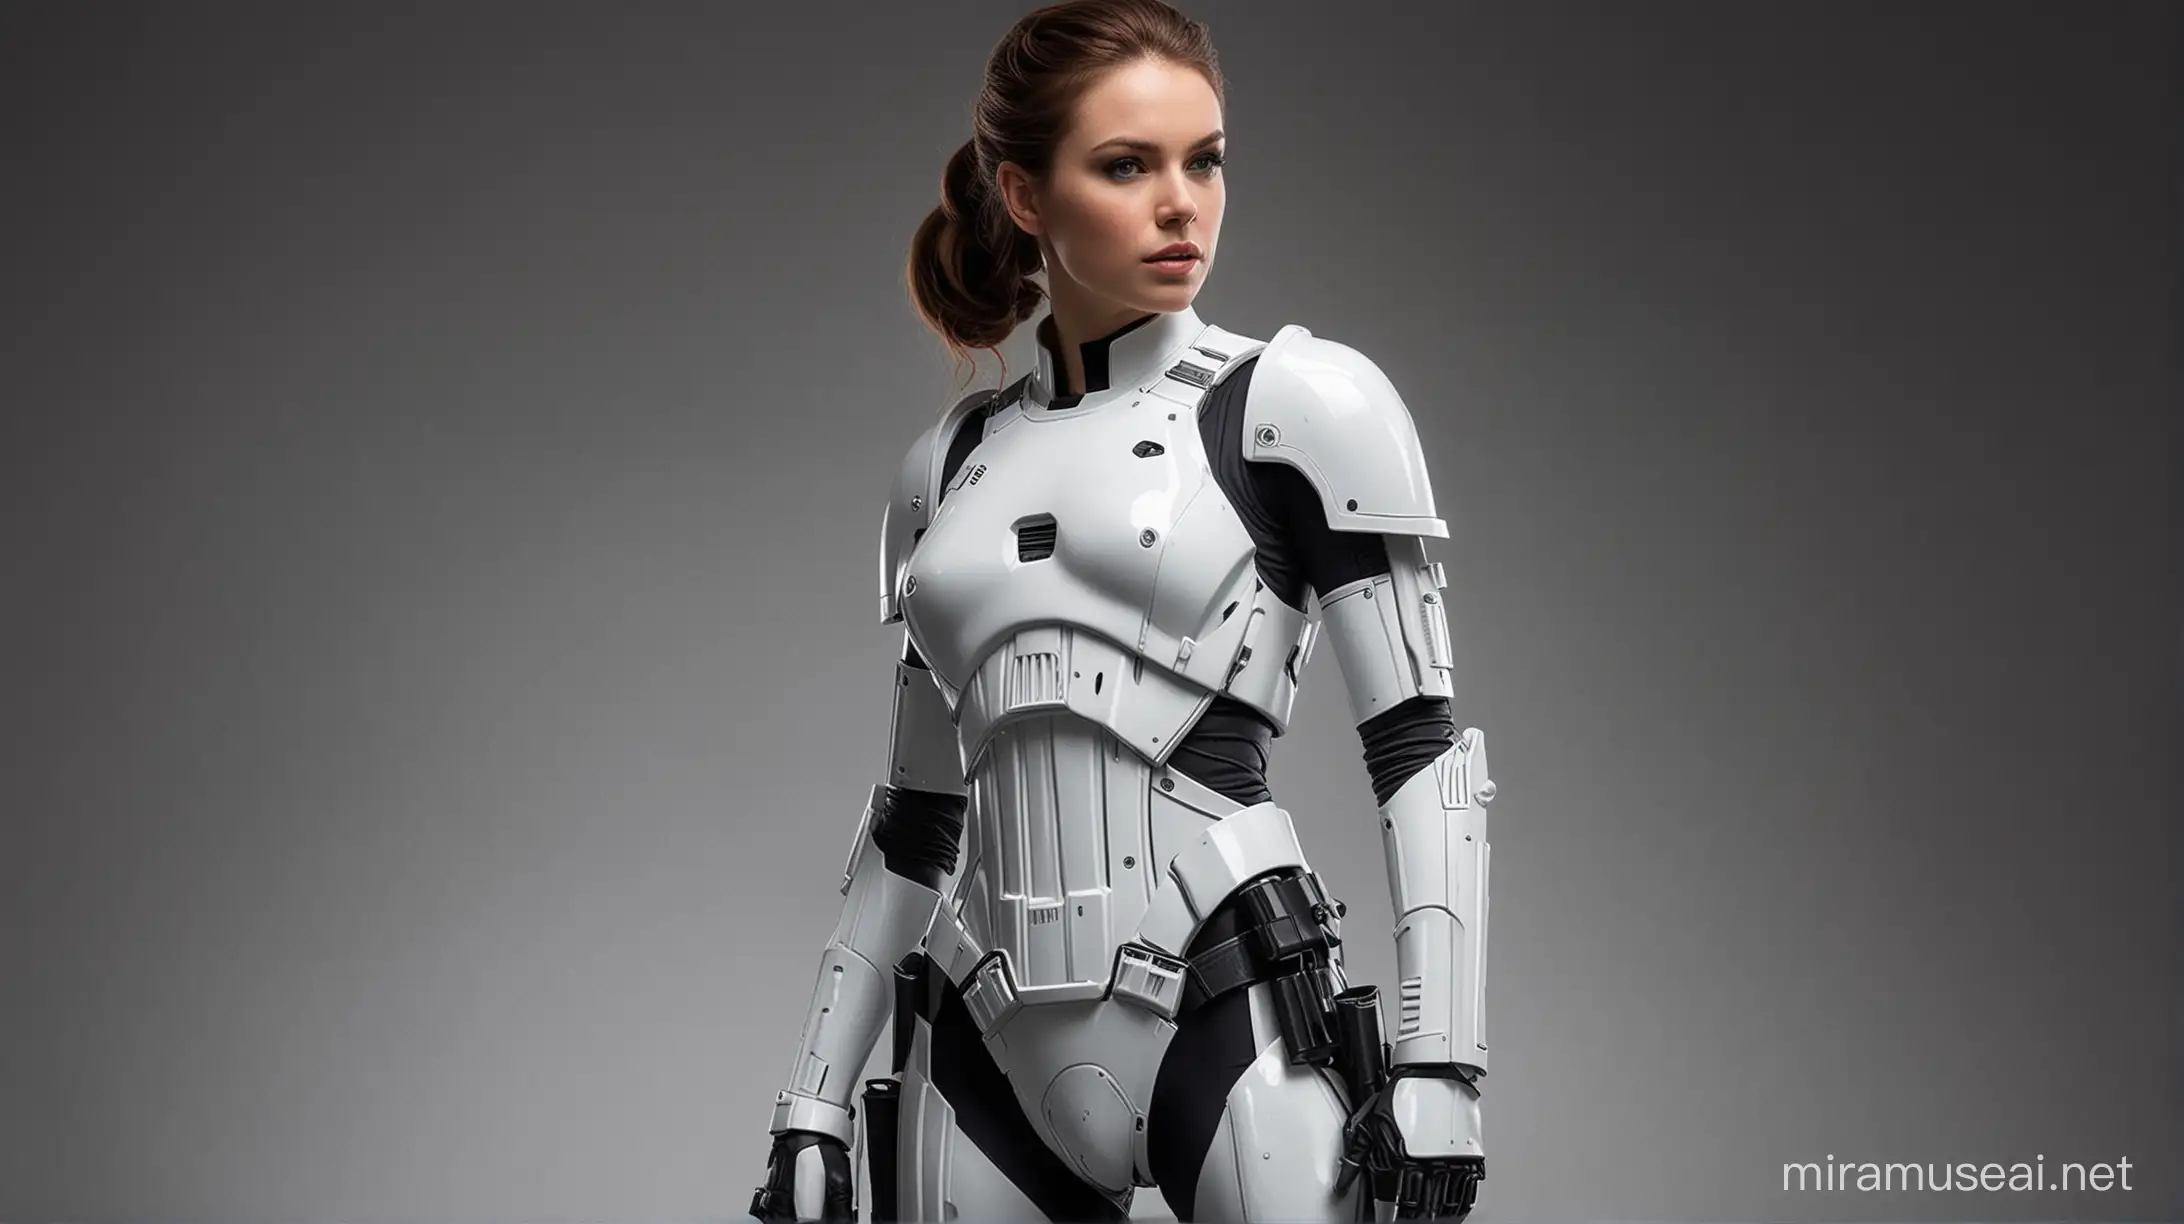 Sexy female Star Wars stormtrooper, wearing partial armor, hot